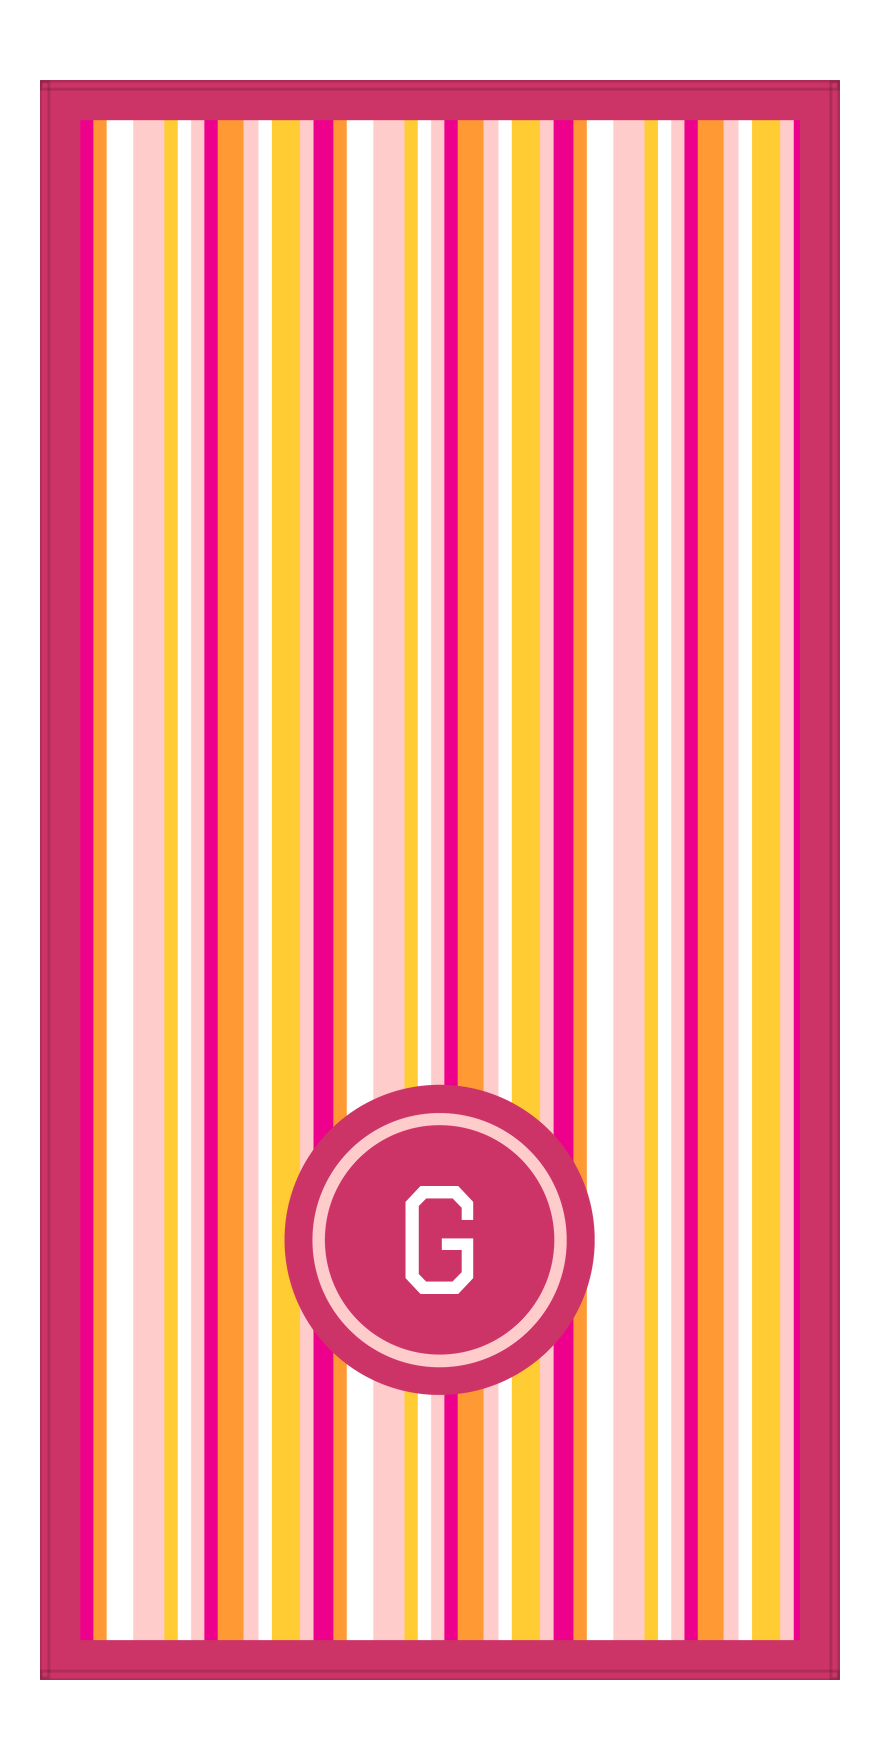 Personalized 5 Color Stripes 3 Repeat Beach Towel - Vertical - Pink and Orange - Circle Off Center Frame - Front View